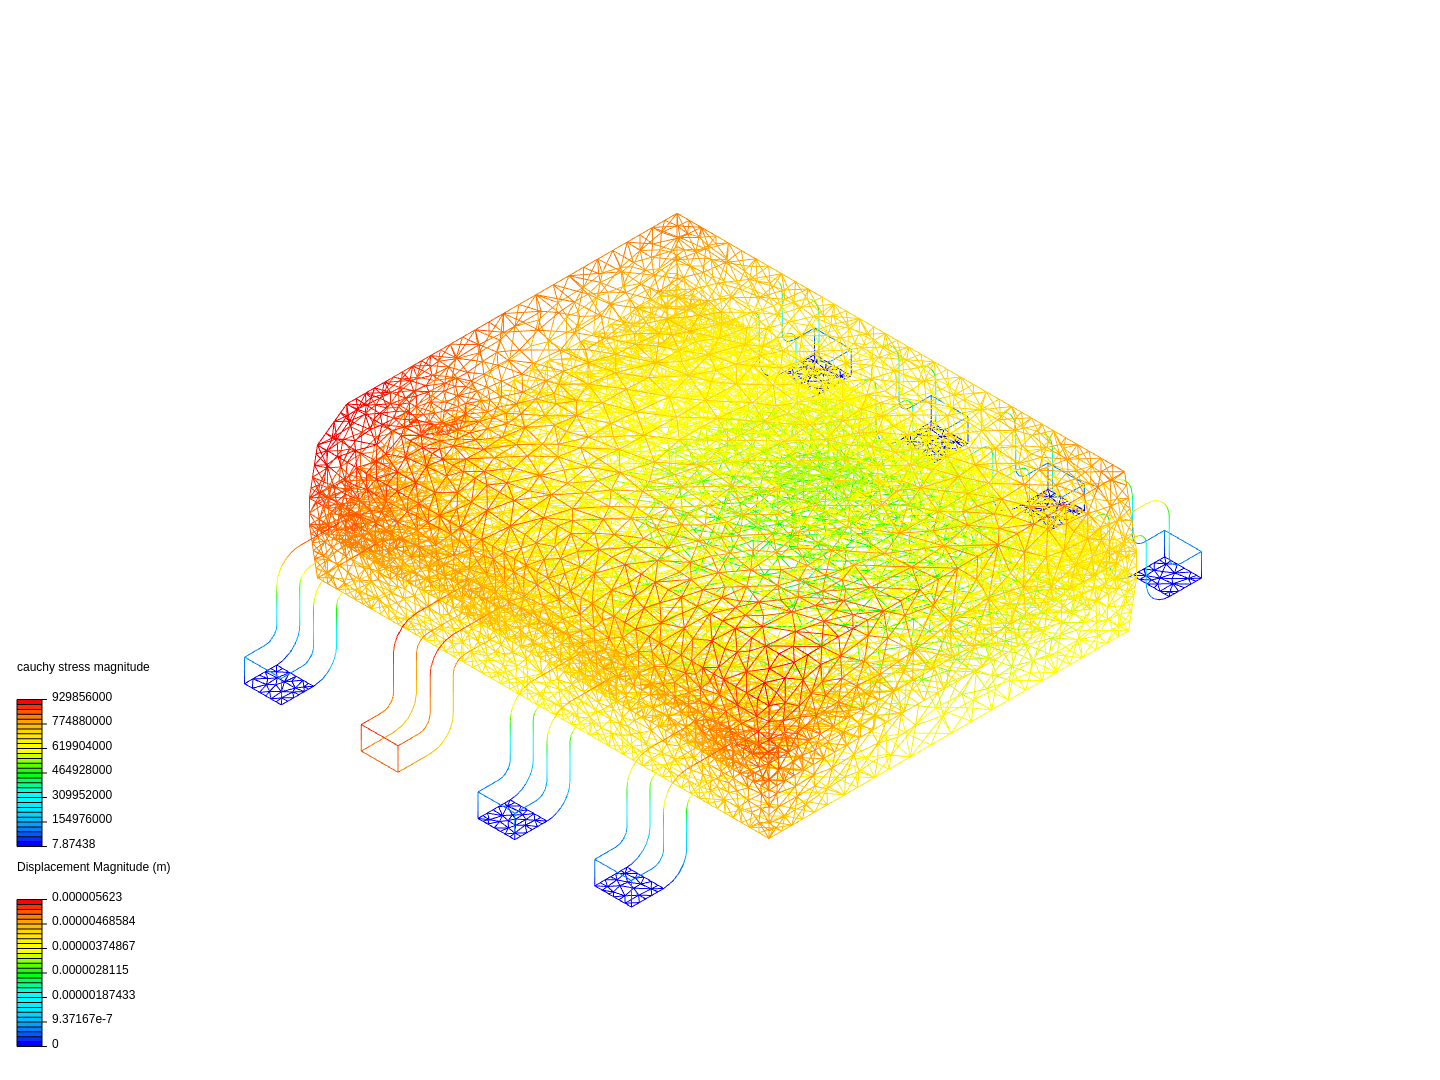 Thermostructural Analysis of 8 Pin-SOIC image